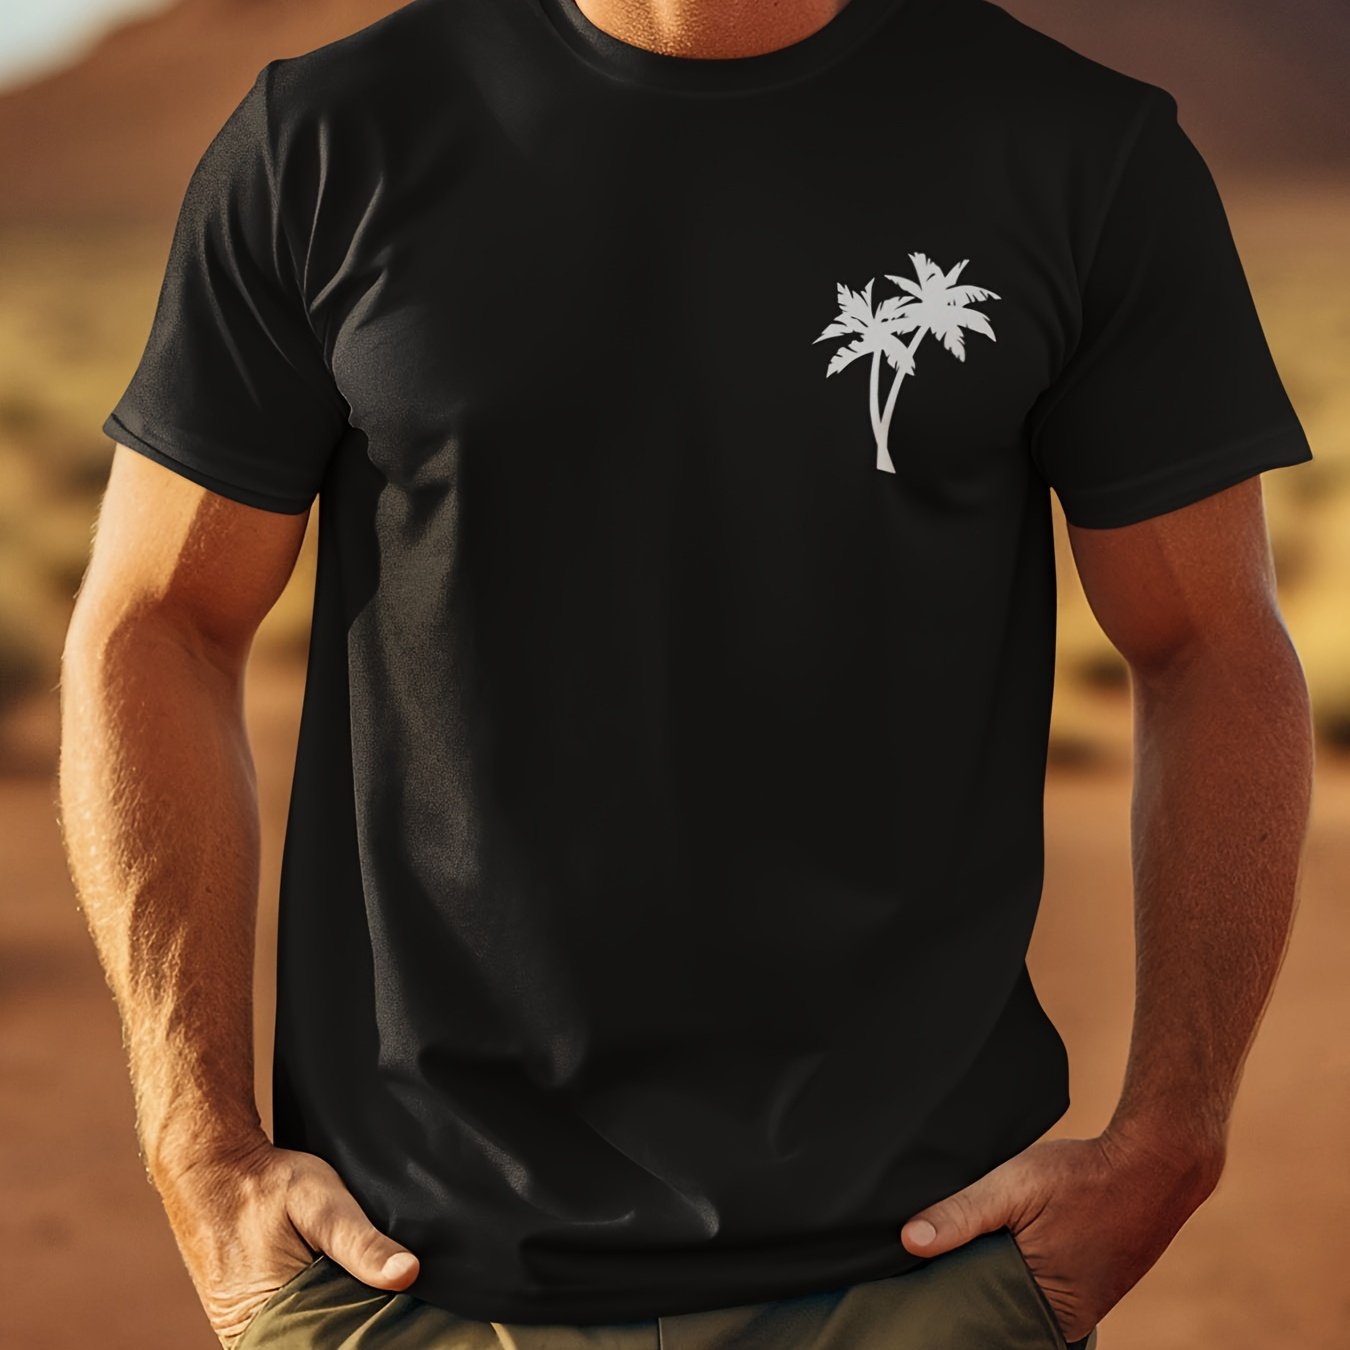 

Palm Trees Print Tee Shirt, Tees For Men, Casual Short Sleeve T-shirt For Summer